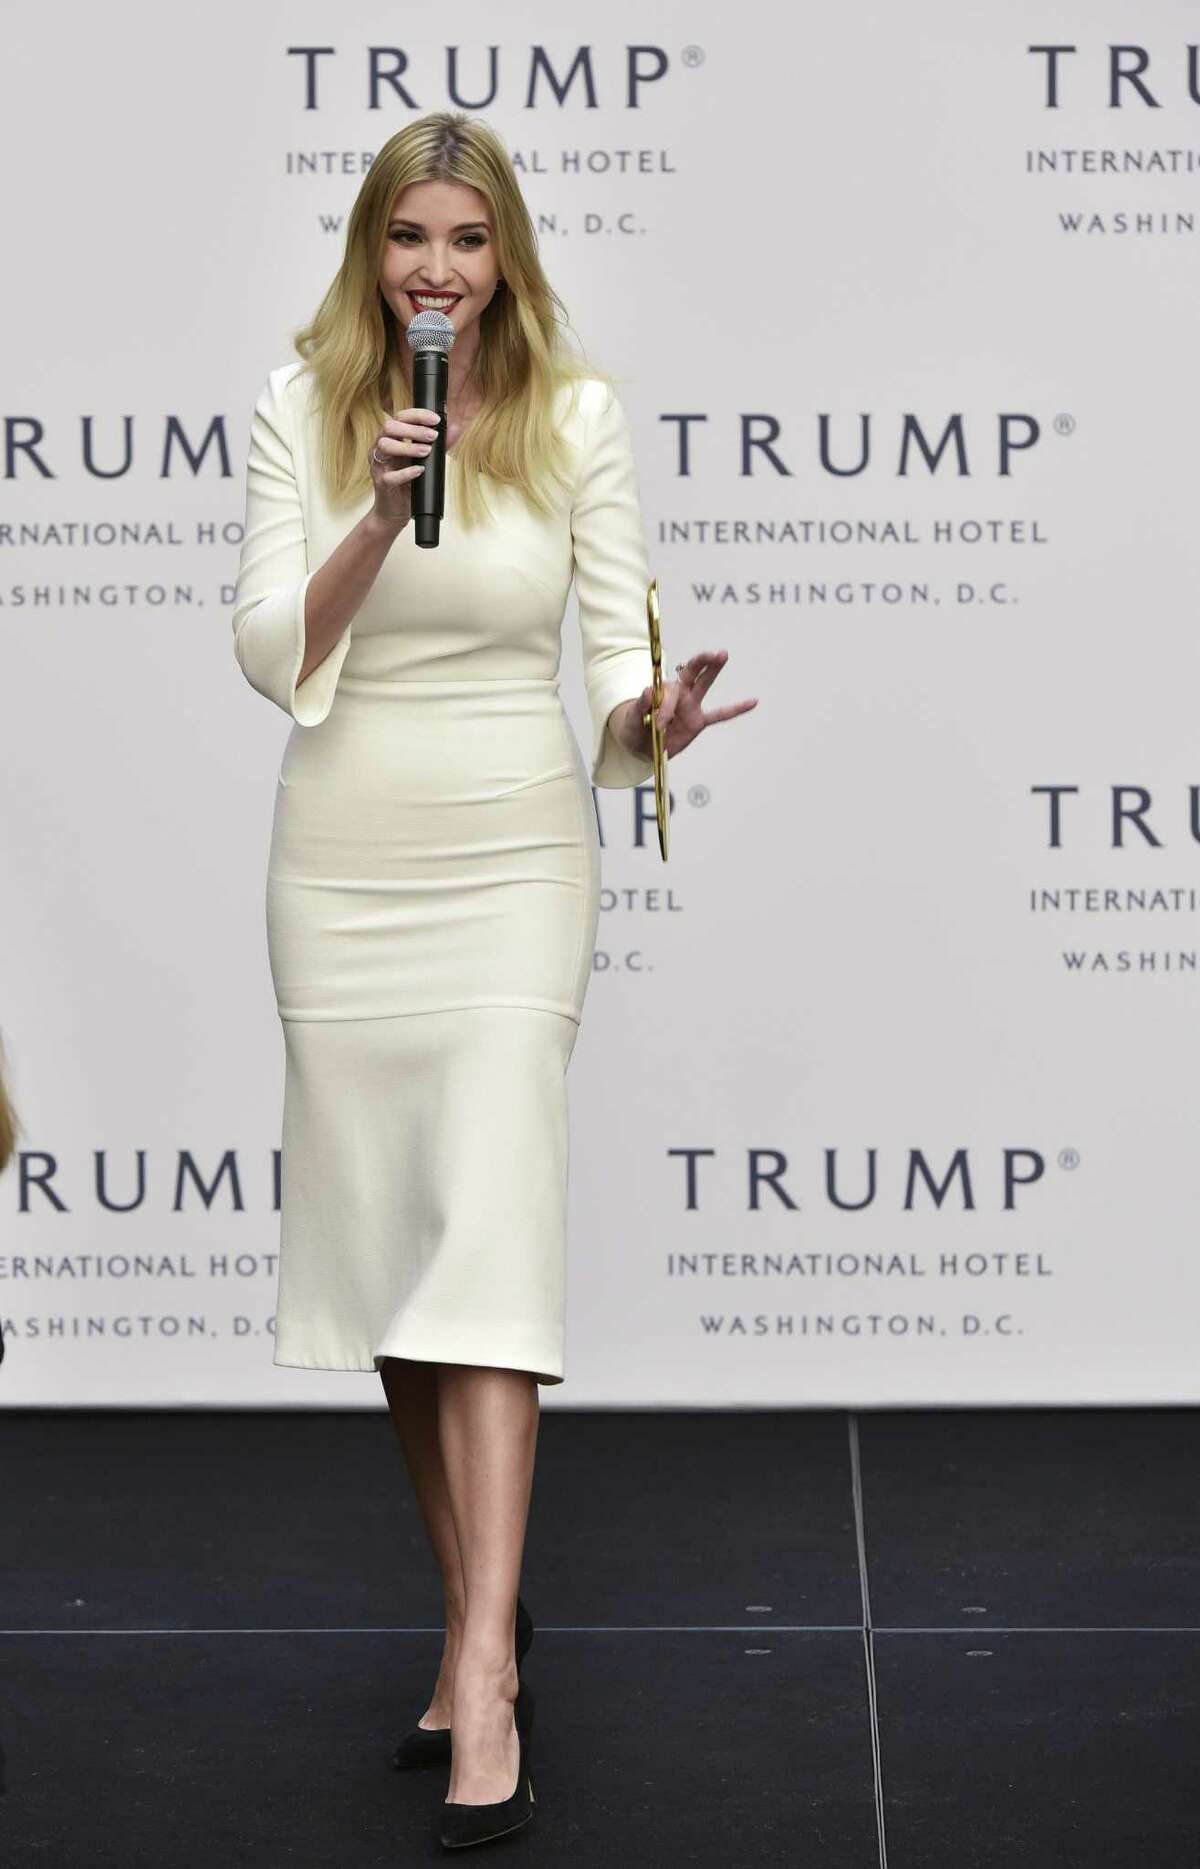 Donald Trump's daughter Ivanka grew up in luxury and began her career while working for her father. However, she's emerged as the second-most-famous Trump. Keep clicking to see photos of the model-turned-businesswoman.